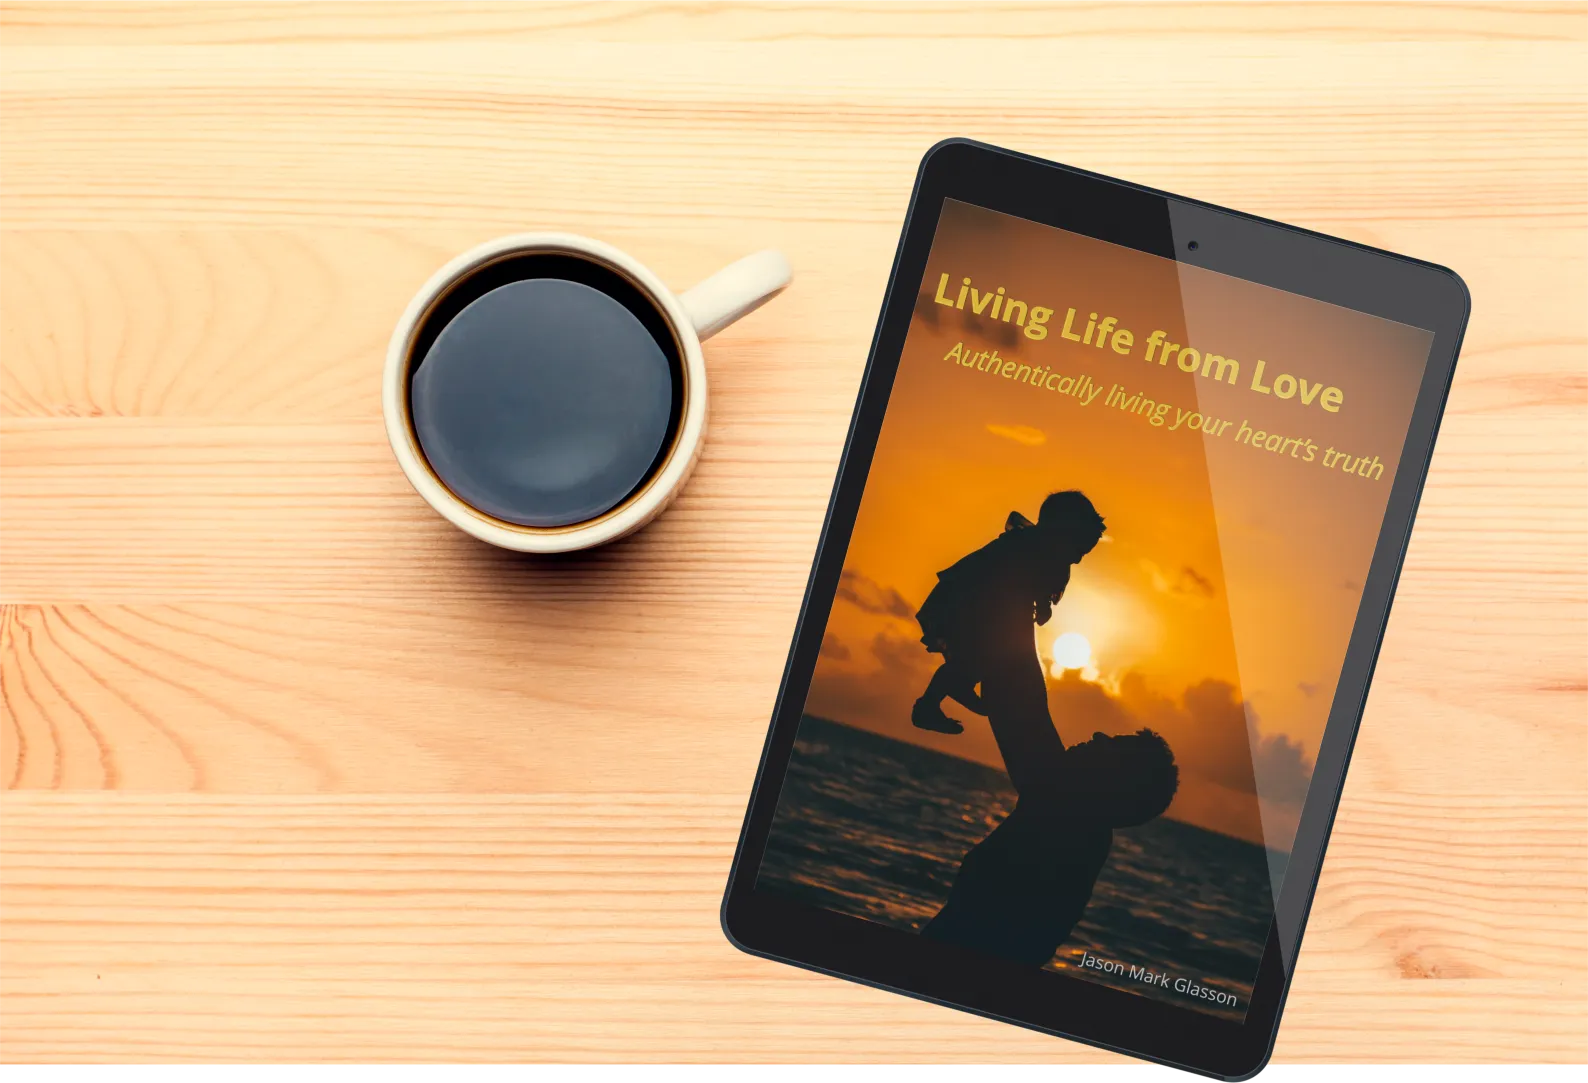 Living Life from Love ebook on tablet with coffee